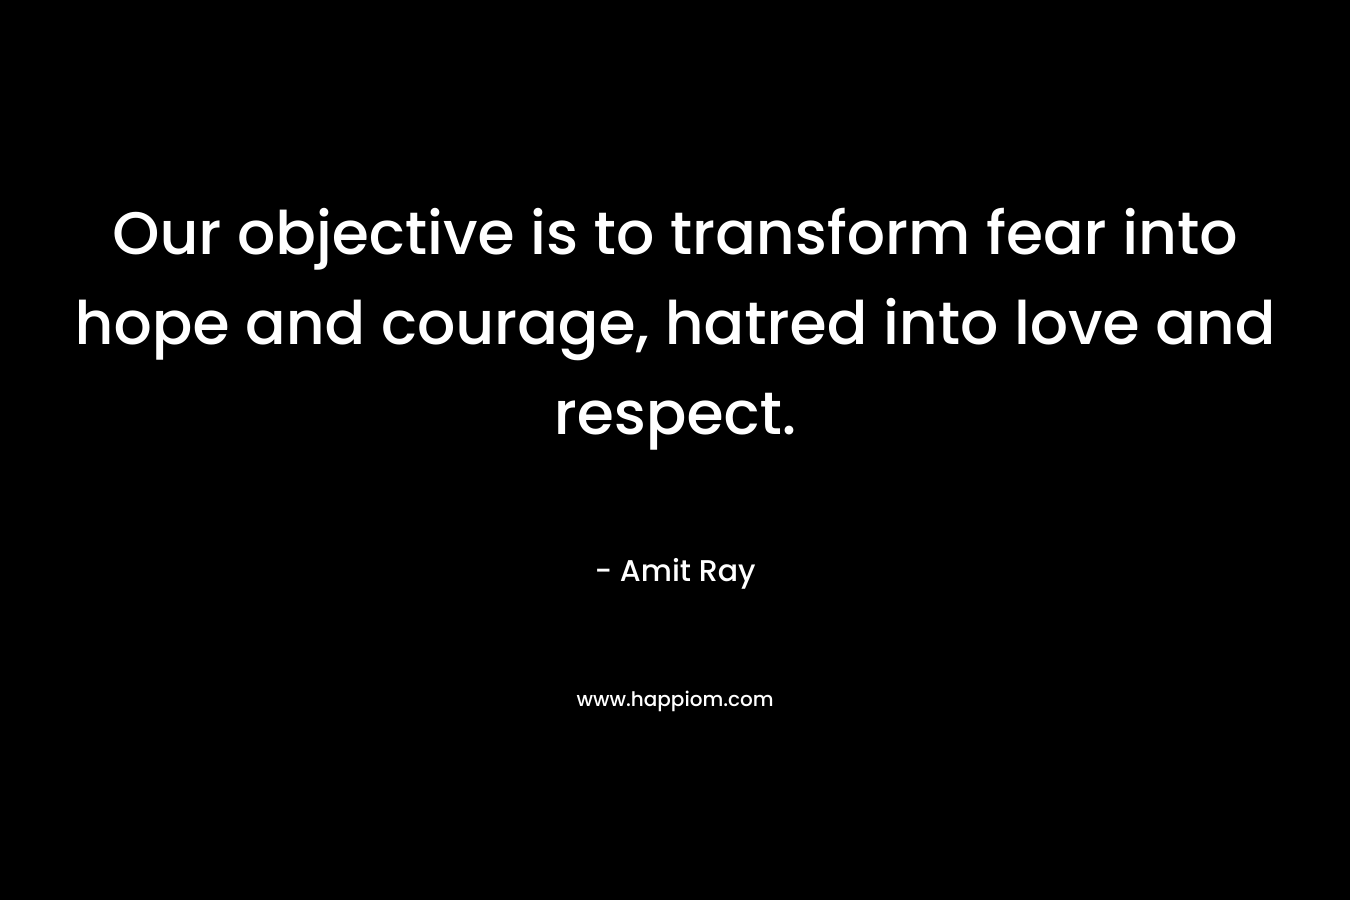 Our objective is to transform fear into hope and courage, hatred into love and respect.